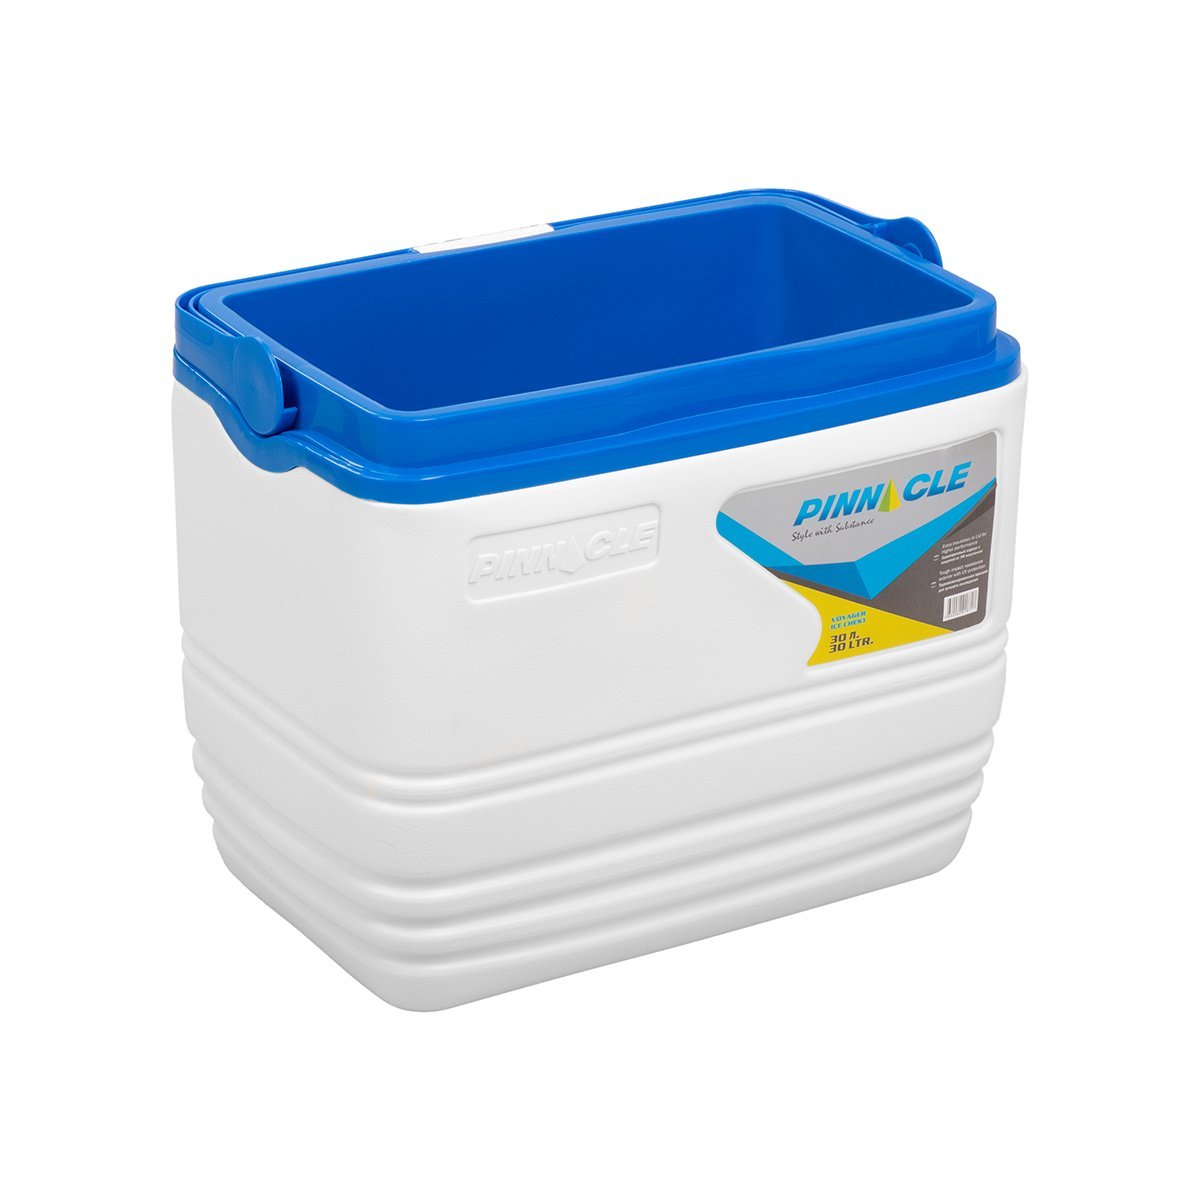 Voyager Portable Camping Ice Chest with Lid Storage Space, 31 qt wodely open